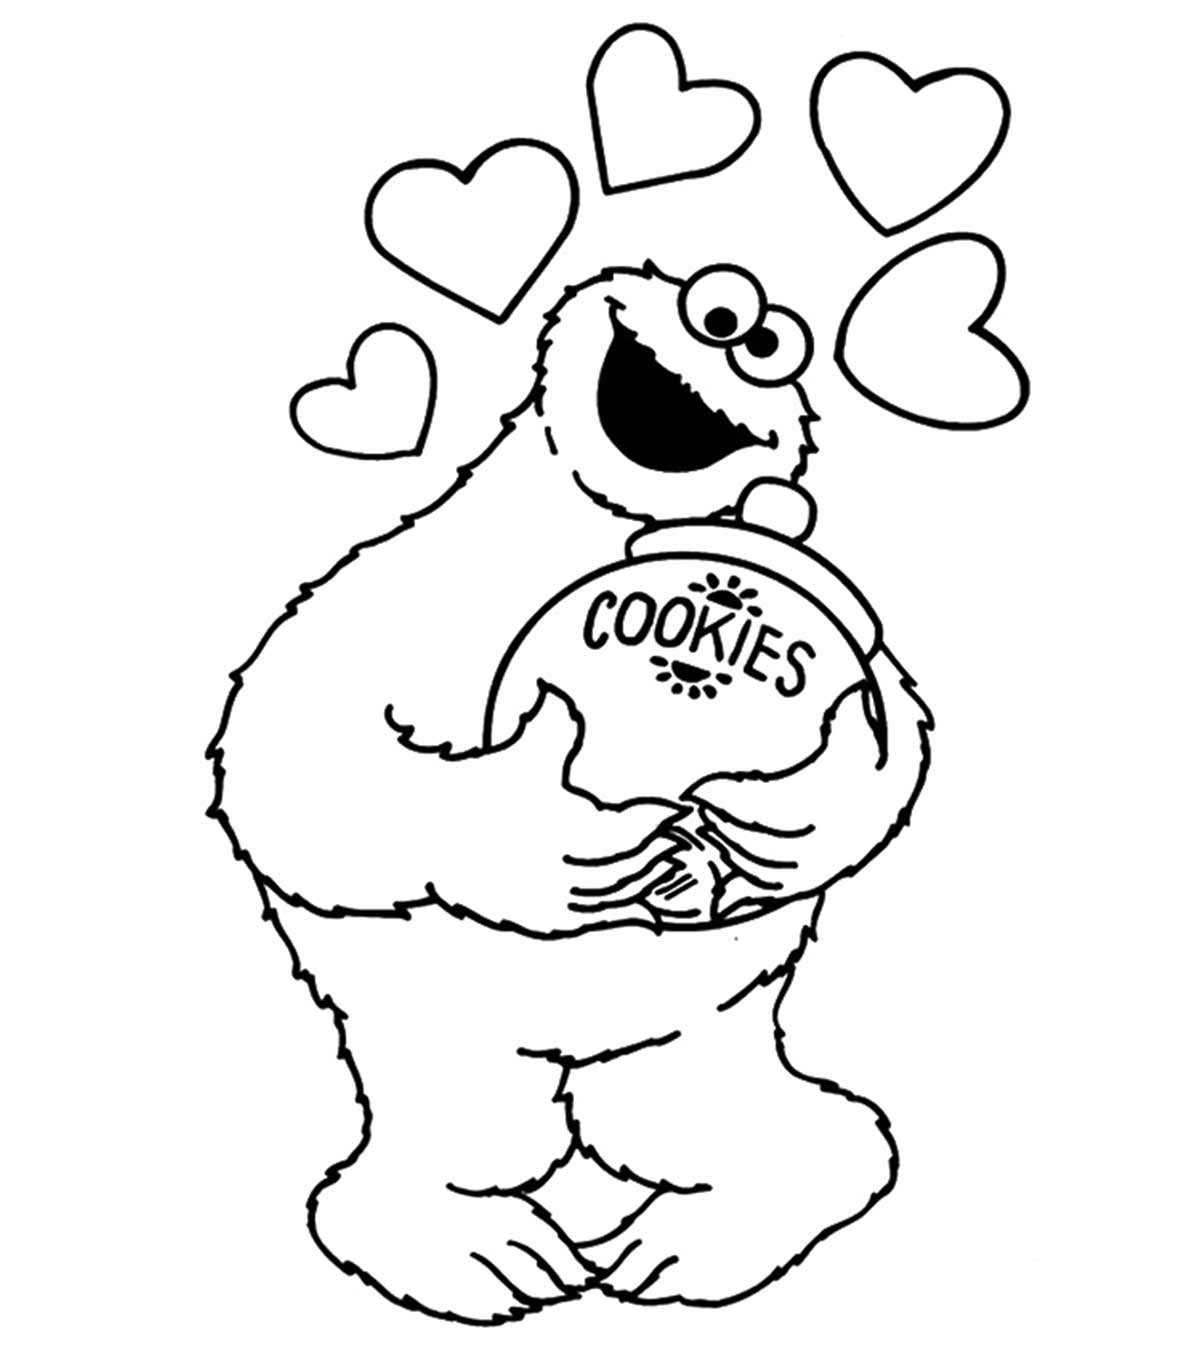 25 Cute & Funny Cookie Monster Coloring Pages Your Toddler Will Love_image